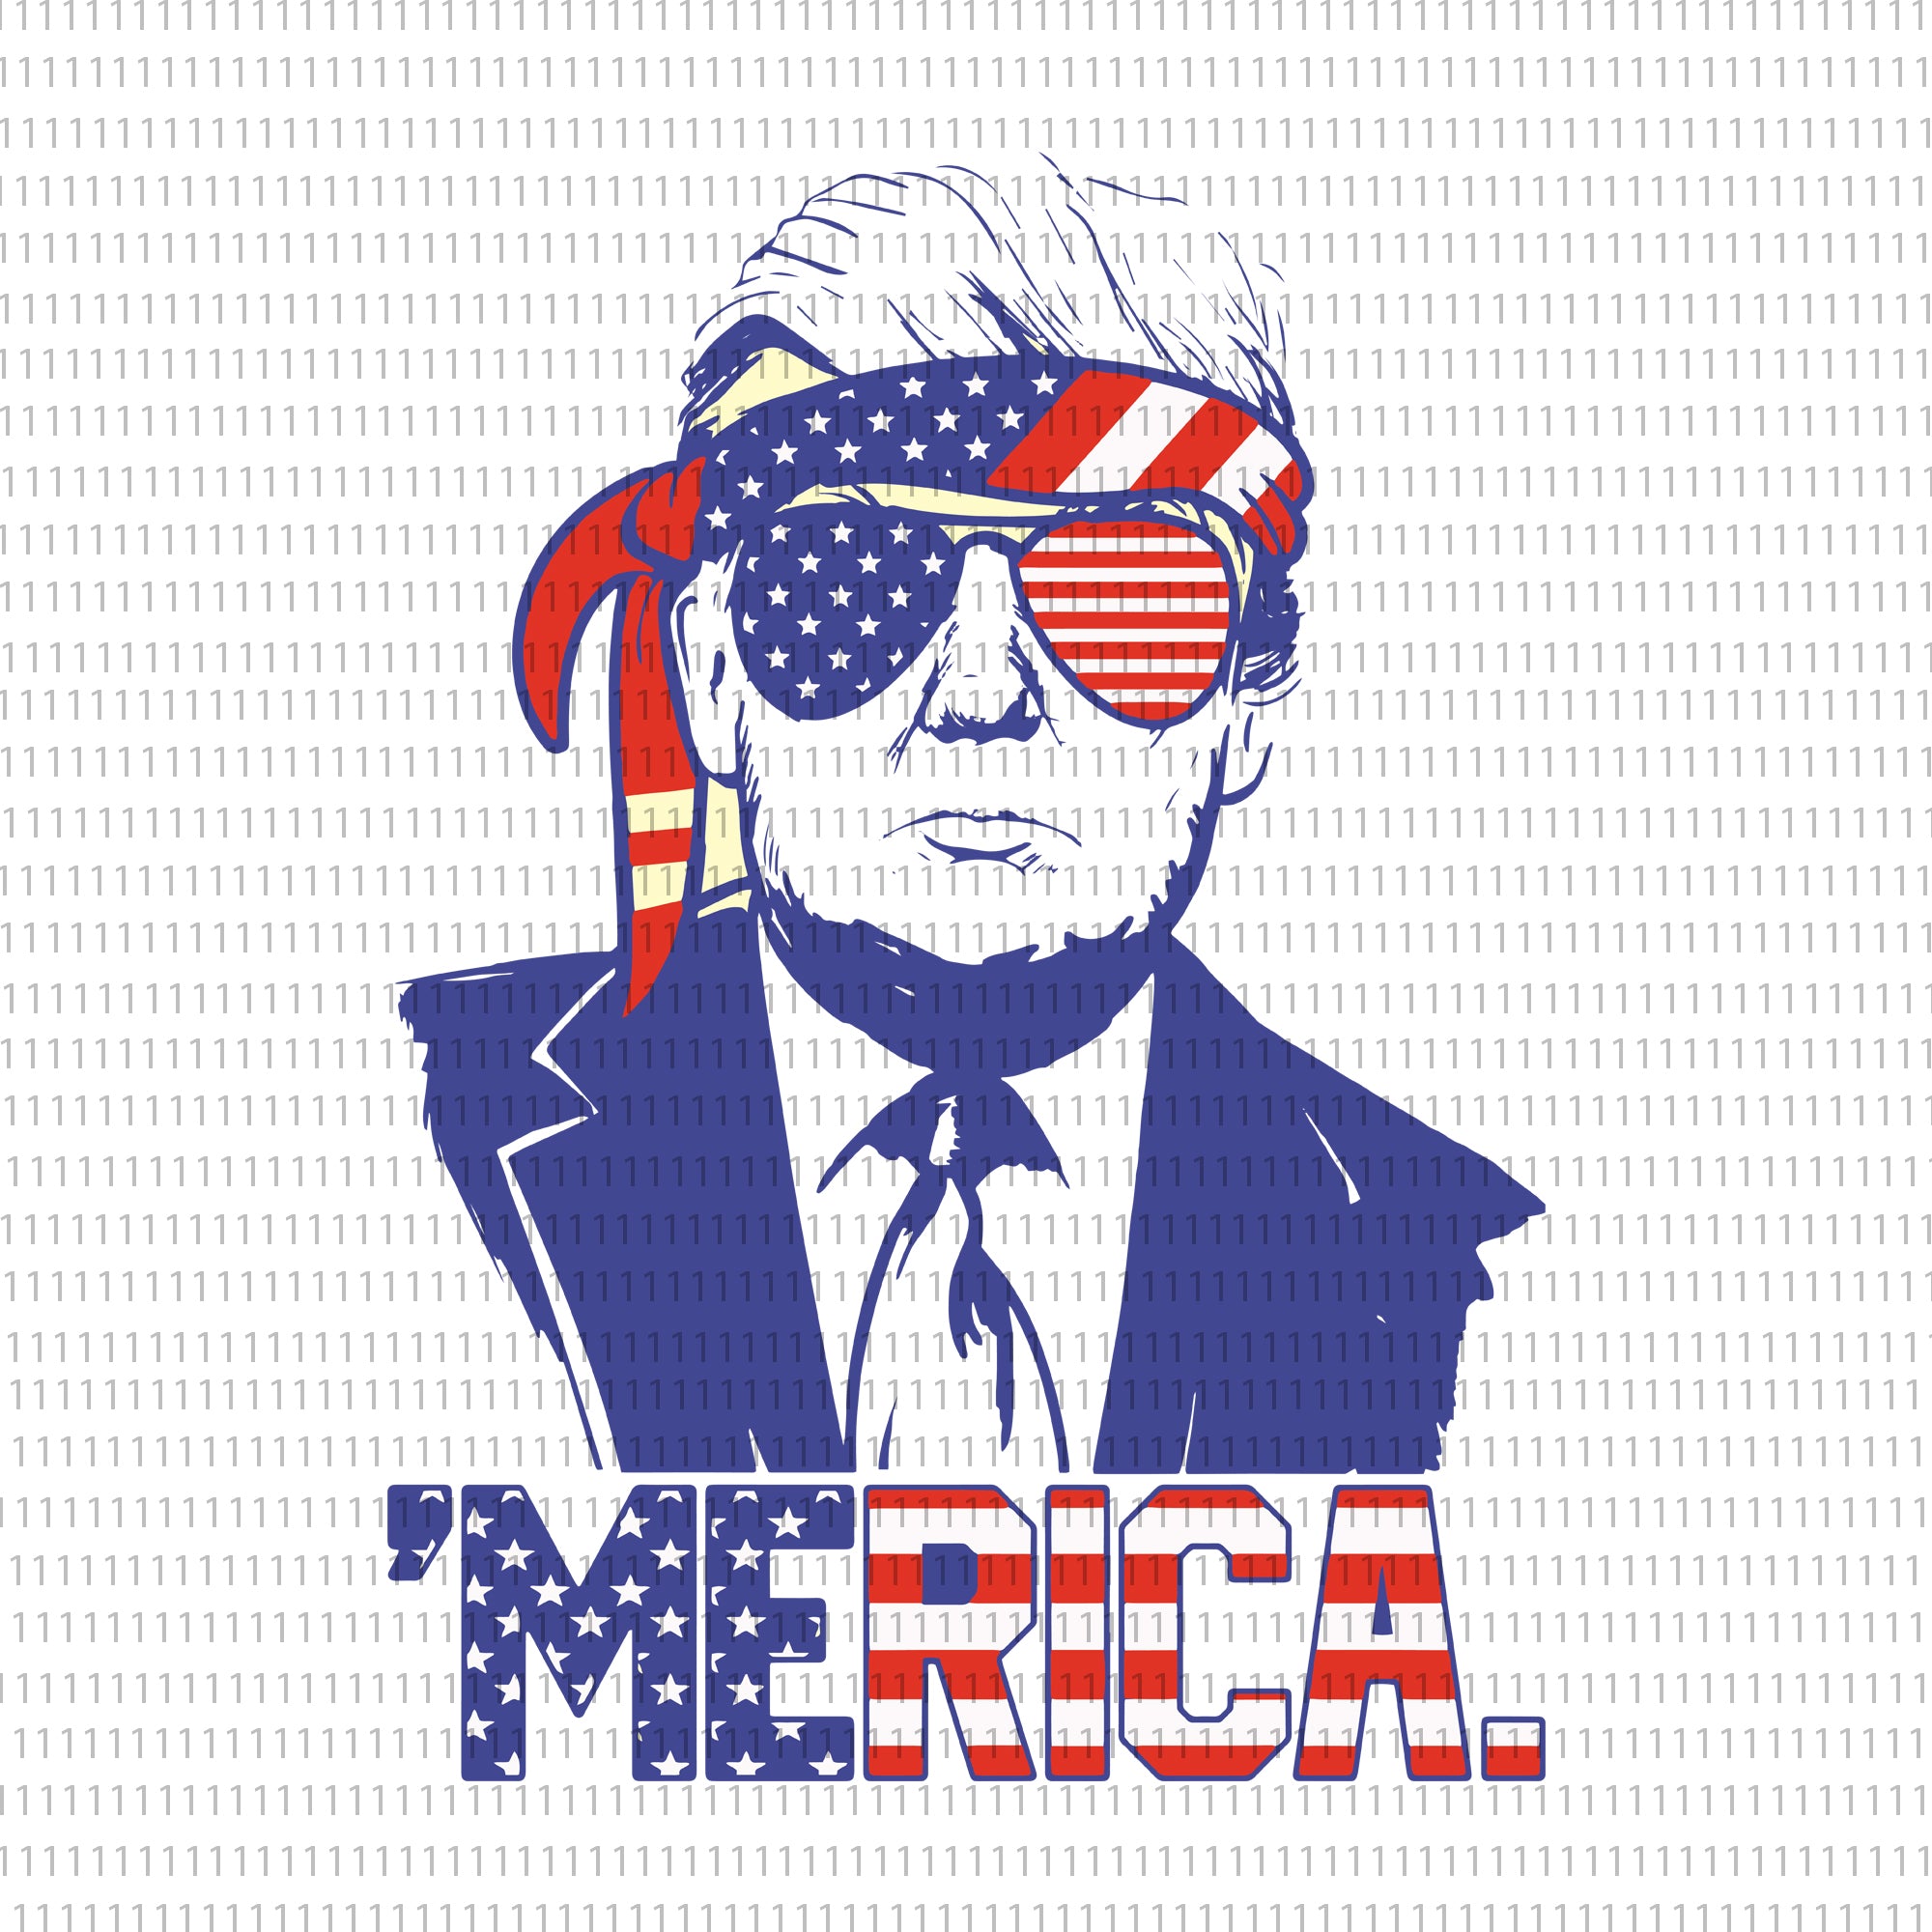 Donald Trump, Donald Trump  png, Donald Trump  4th of July, Donald Trump svg, trump svg, trump 2020, july 4th svg, merica svg, american flag svg, american flag, sunglasses svg, Independence Day, 4th of july svg, 4th of July